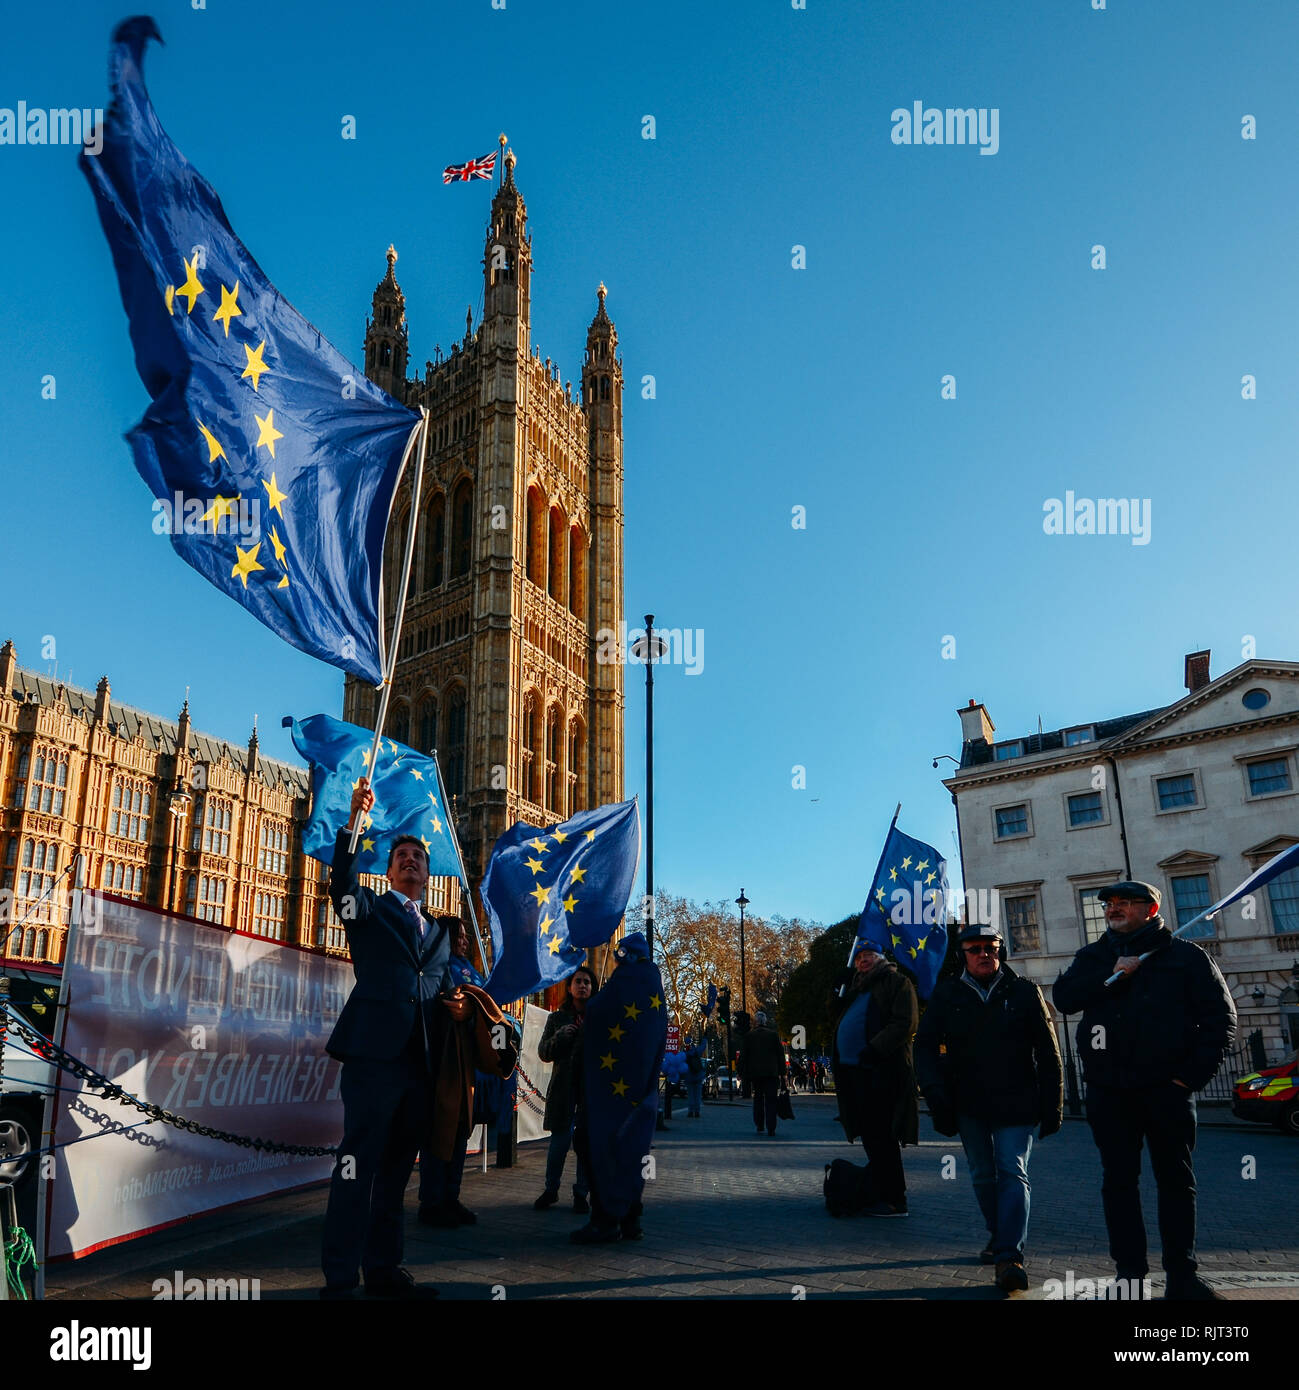 London, UK - Feb 7, 2019: Anti-Brexit protester weaing a suit holds an EU flag outside Westminster, London, UK Credit: Alexandre Rotenberg/Alamy Live News Stock Photo